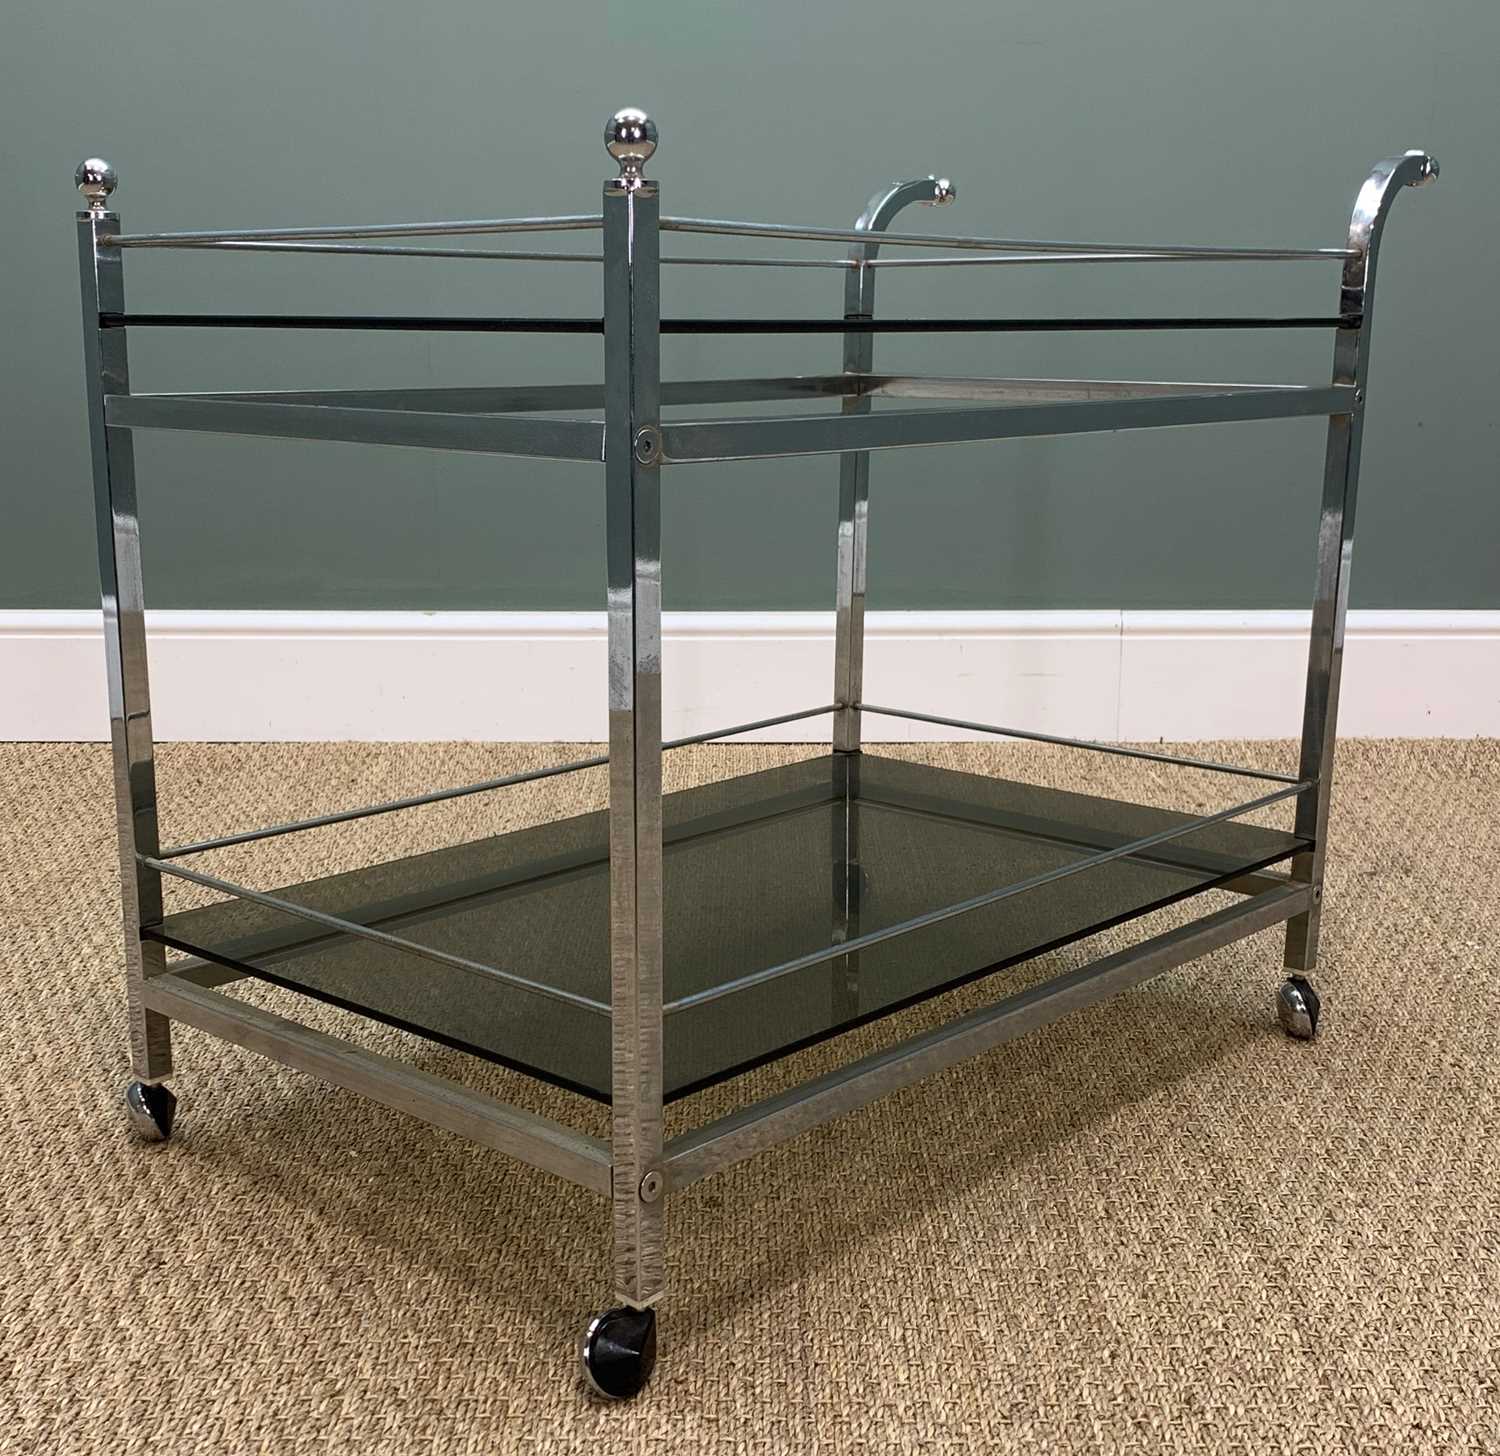 VINTAGE CHROME AND GLASS DRINKS TROLLEY, circa 1970s, smokey glass trays within rails, castors, - Image 3 of 3